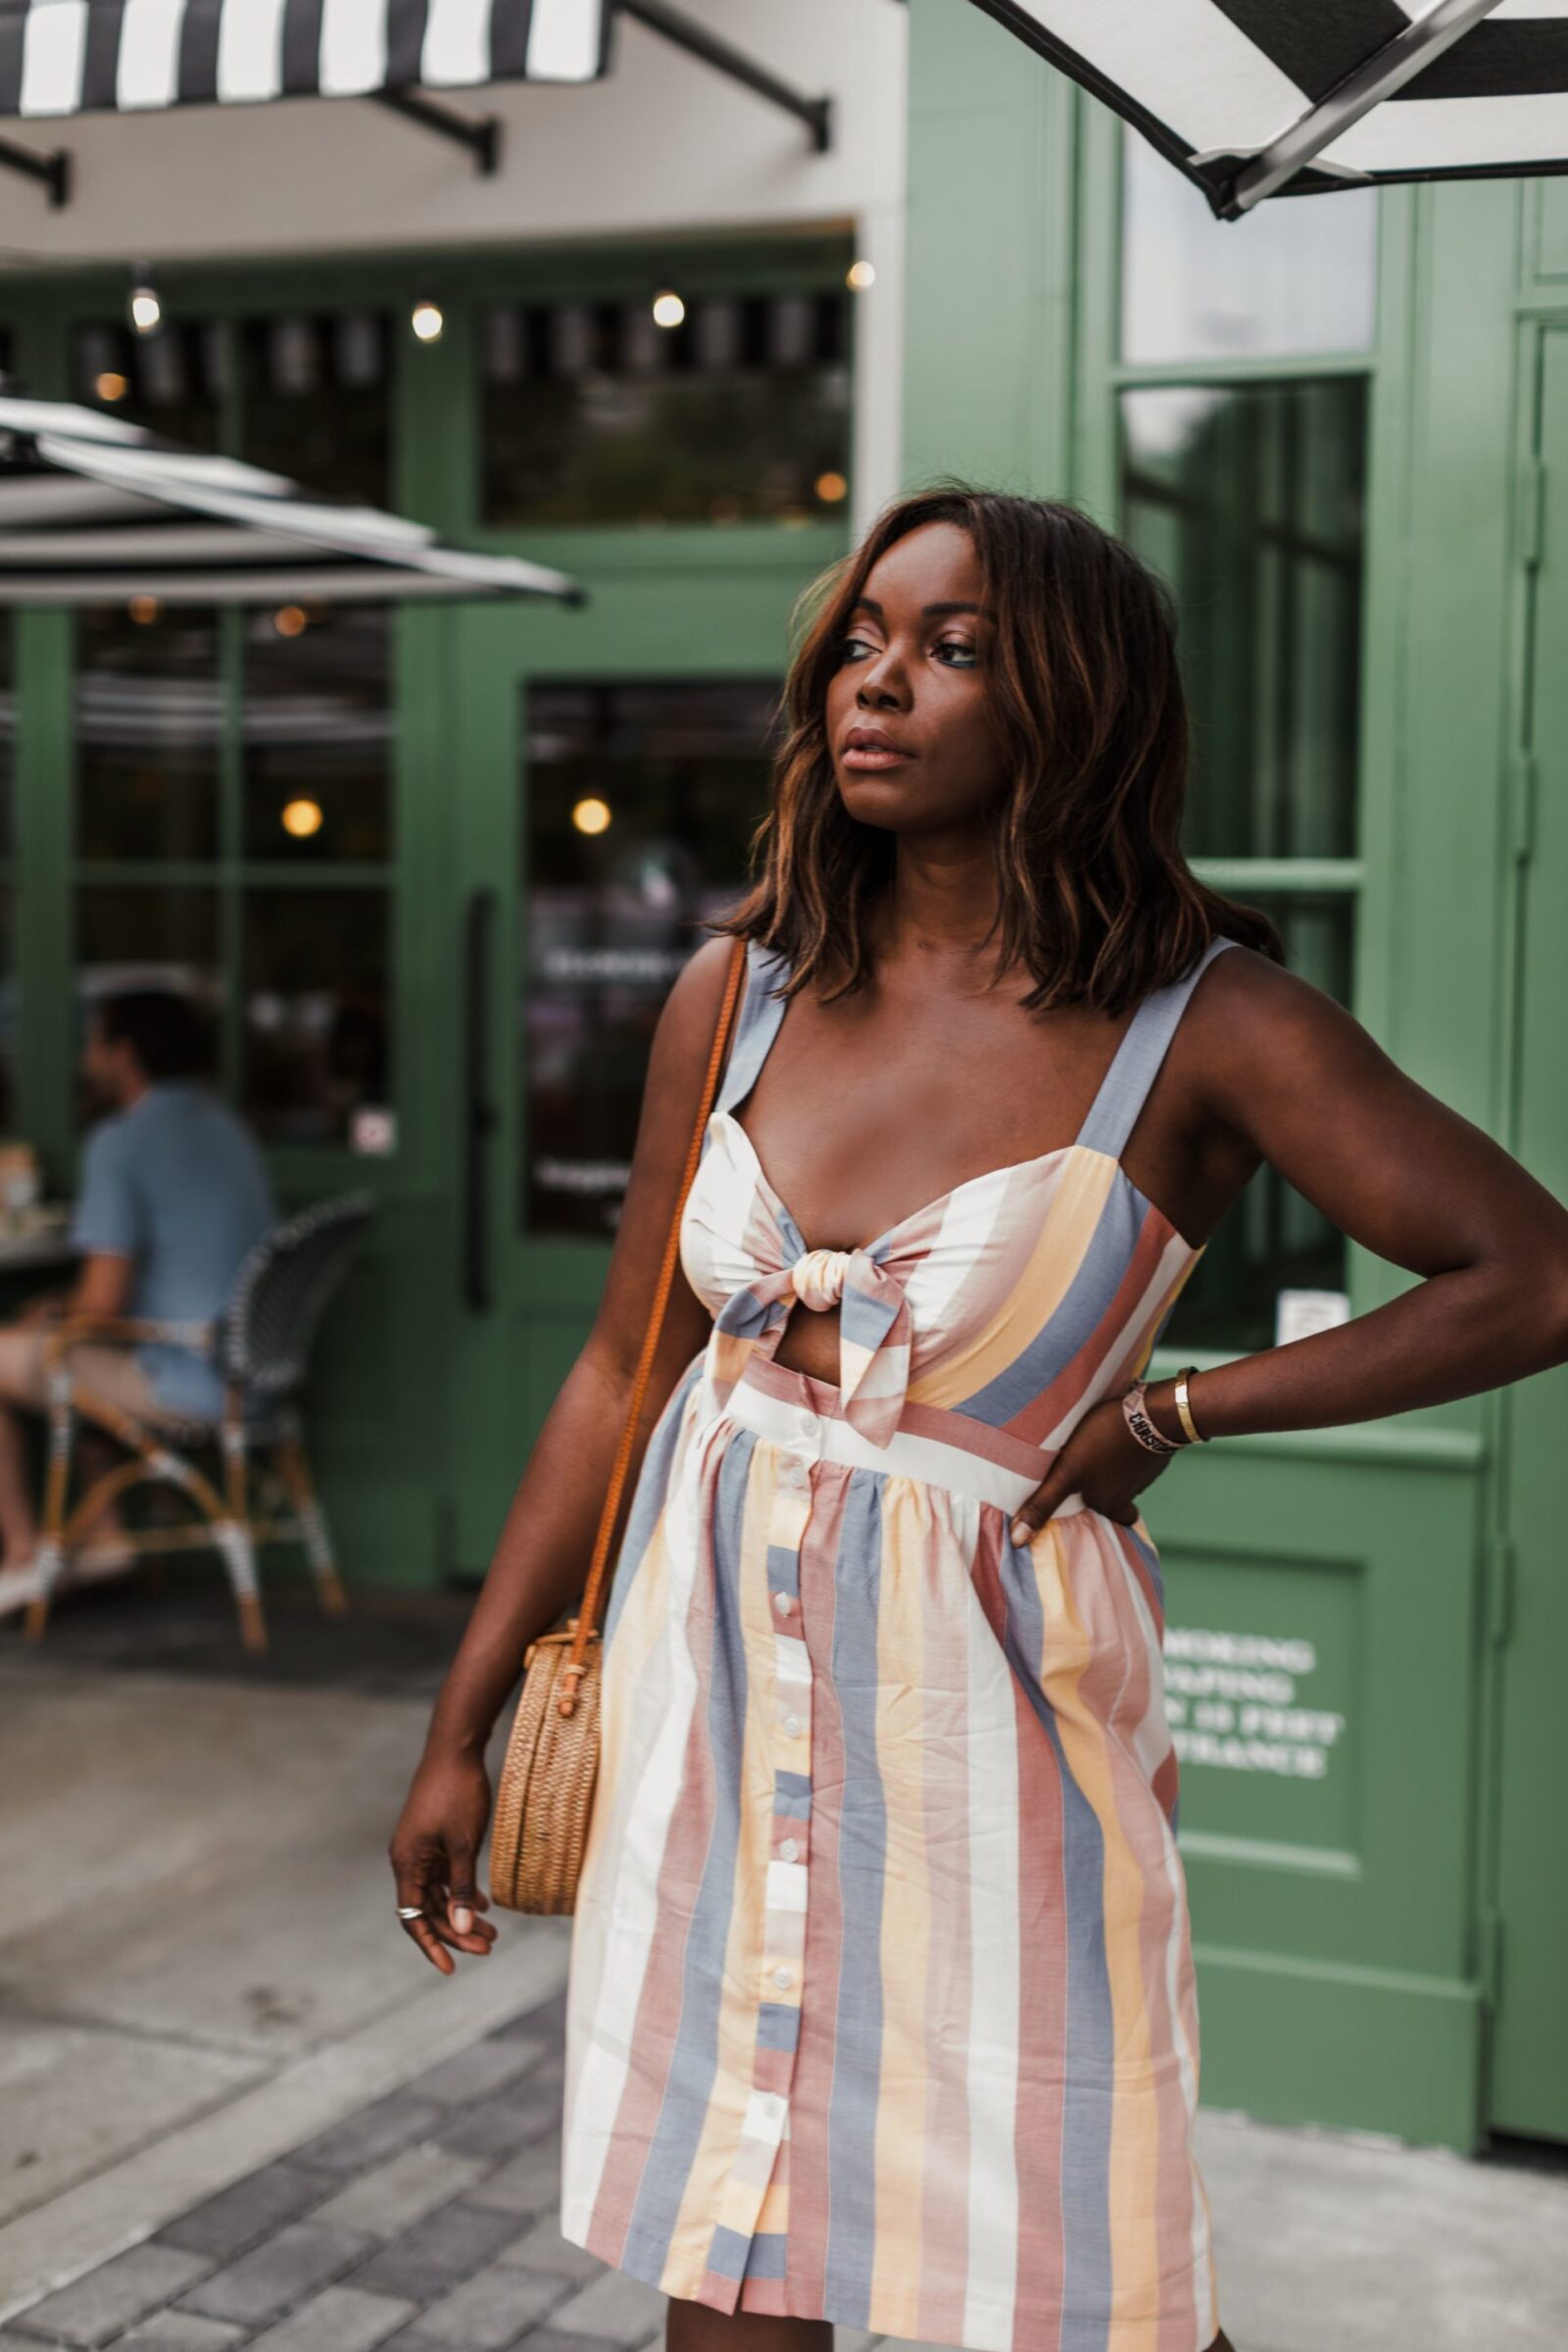 Rainbow Print Dresses, Tops & Skirts from Madewell » MILLENNIELLE